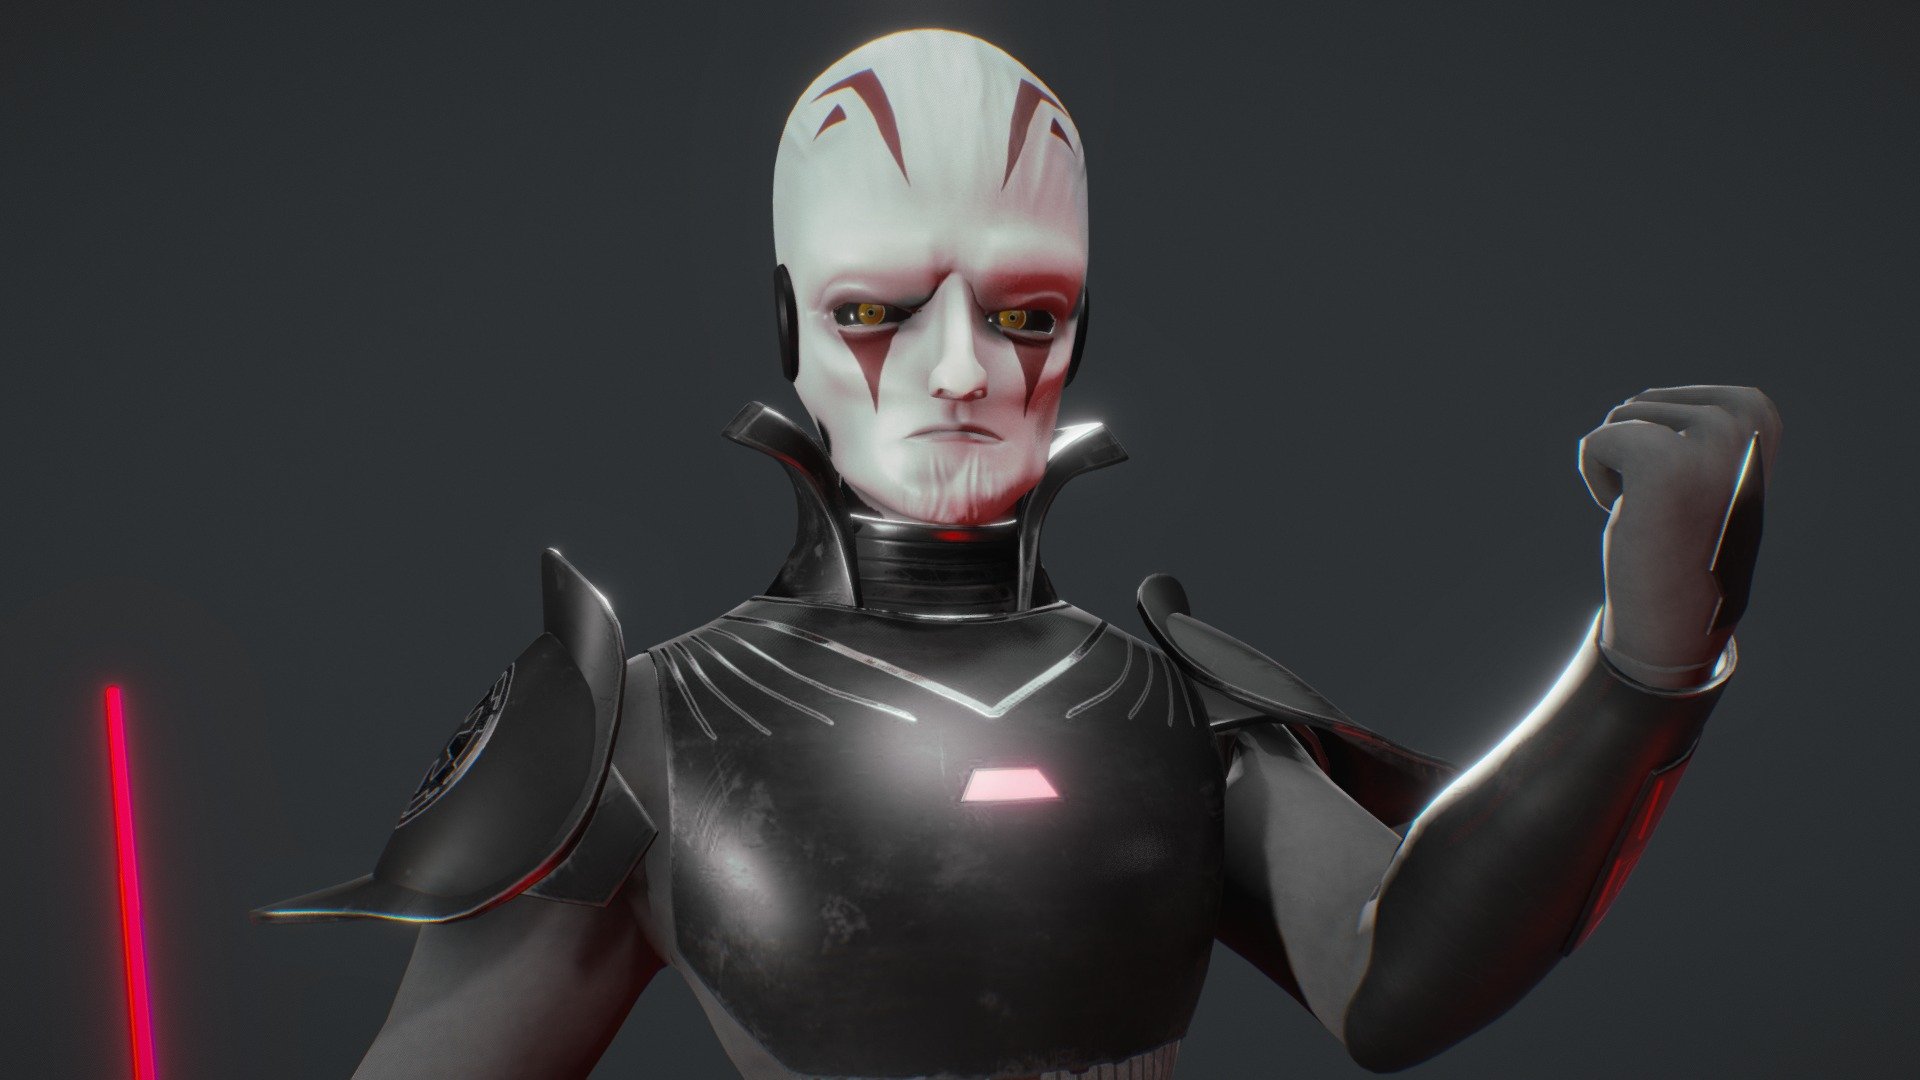 The Grand Inquisitor Wars model by DanielC87 [7bcb464]